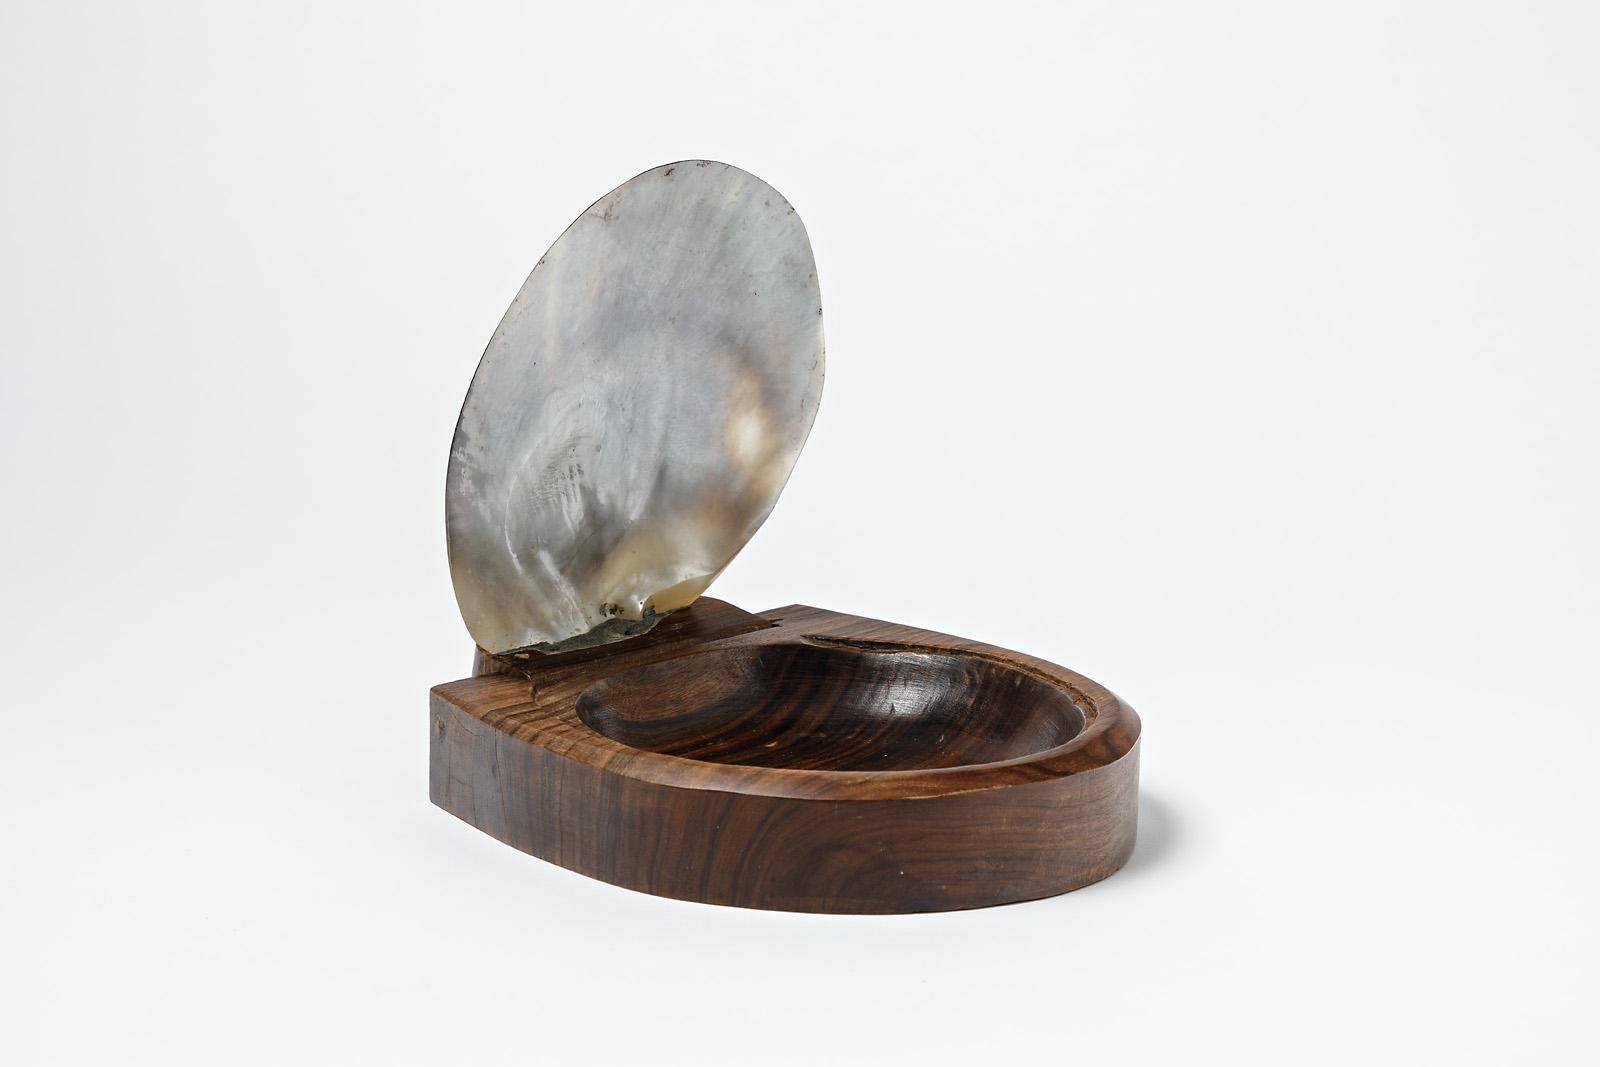 French Midcentury Jewelry Wood and Shelf Box circa 1950 Attributed to Alexandre Noll